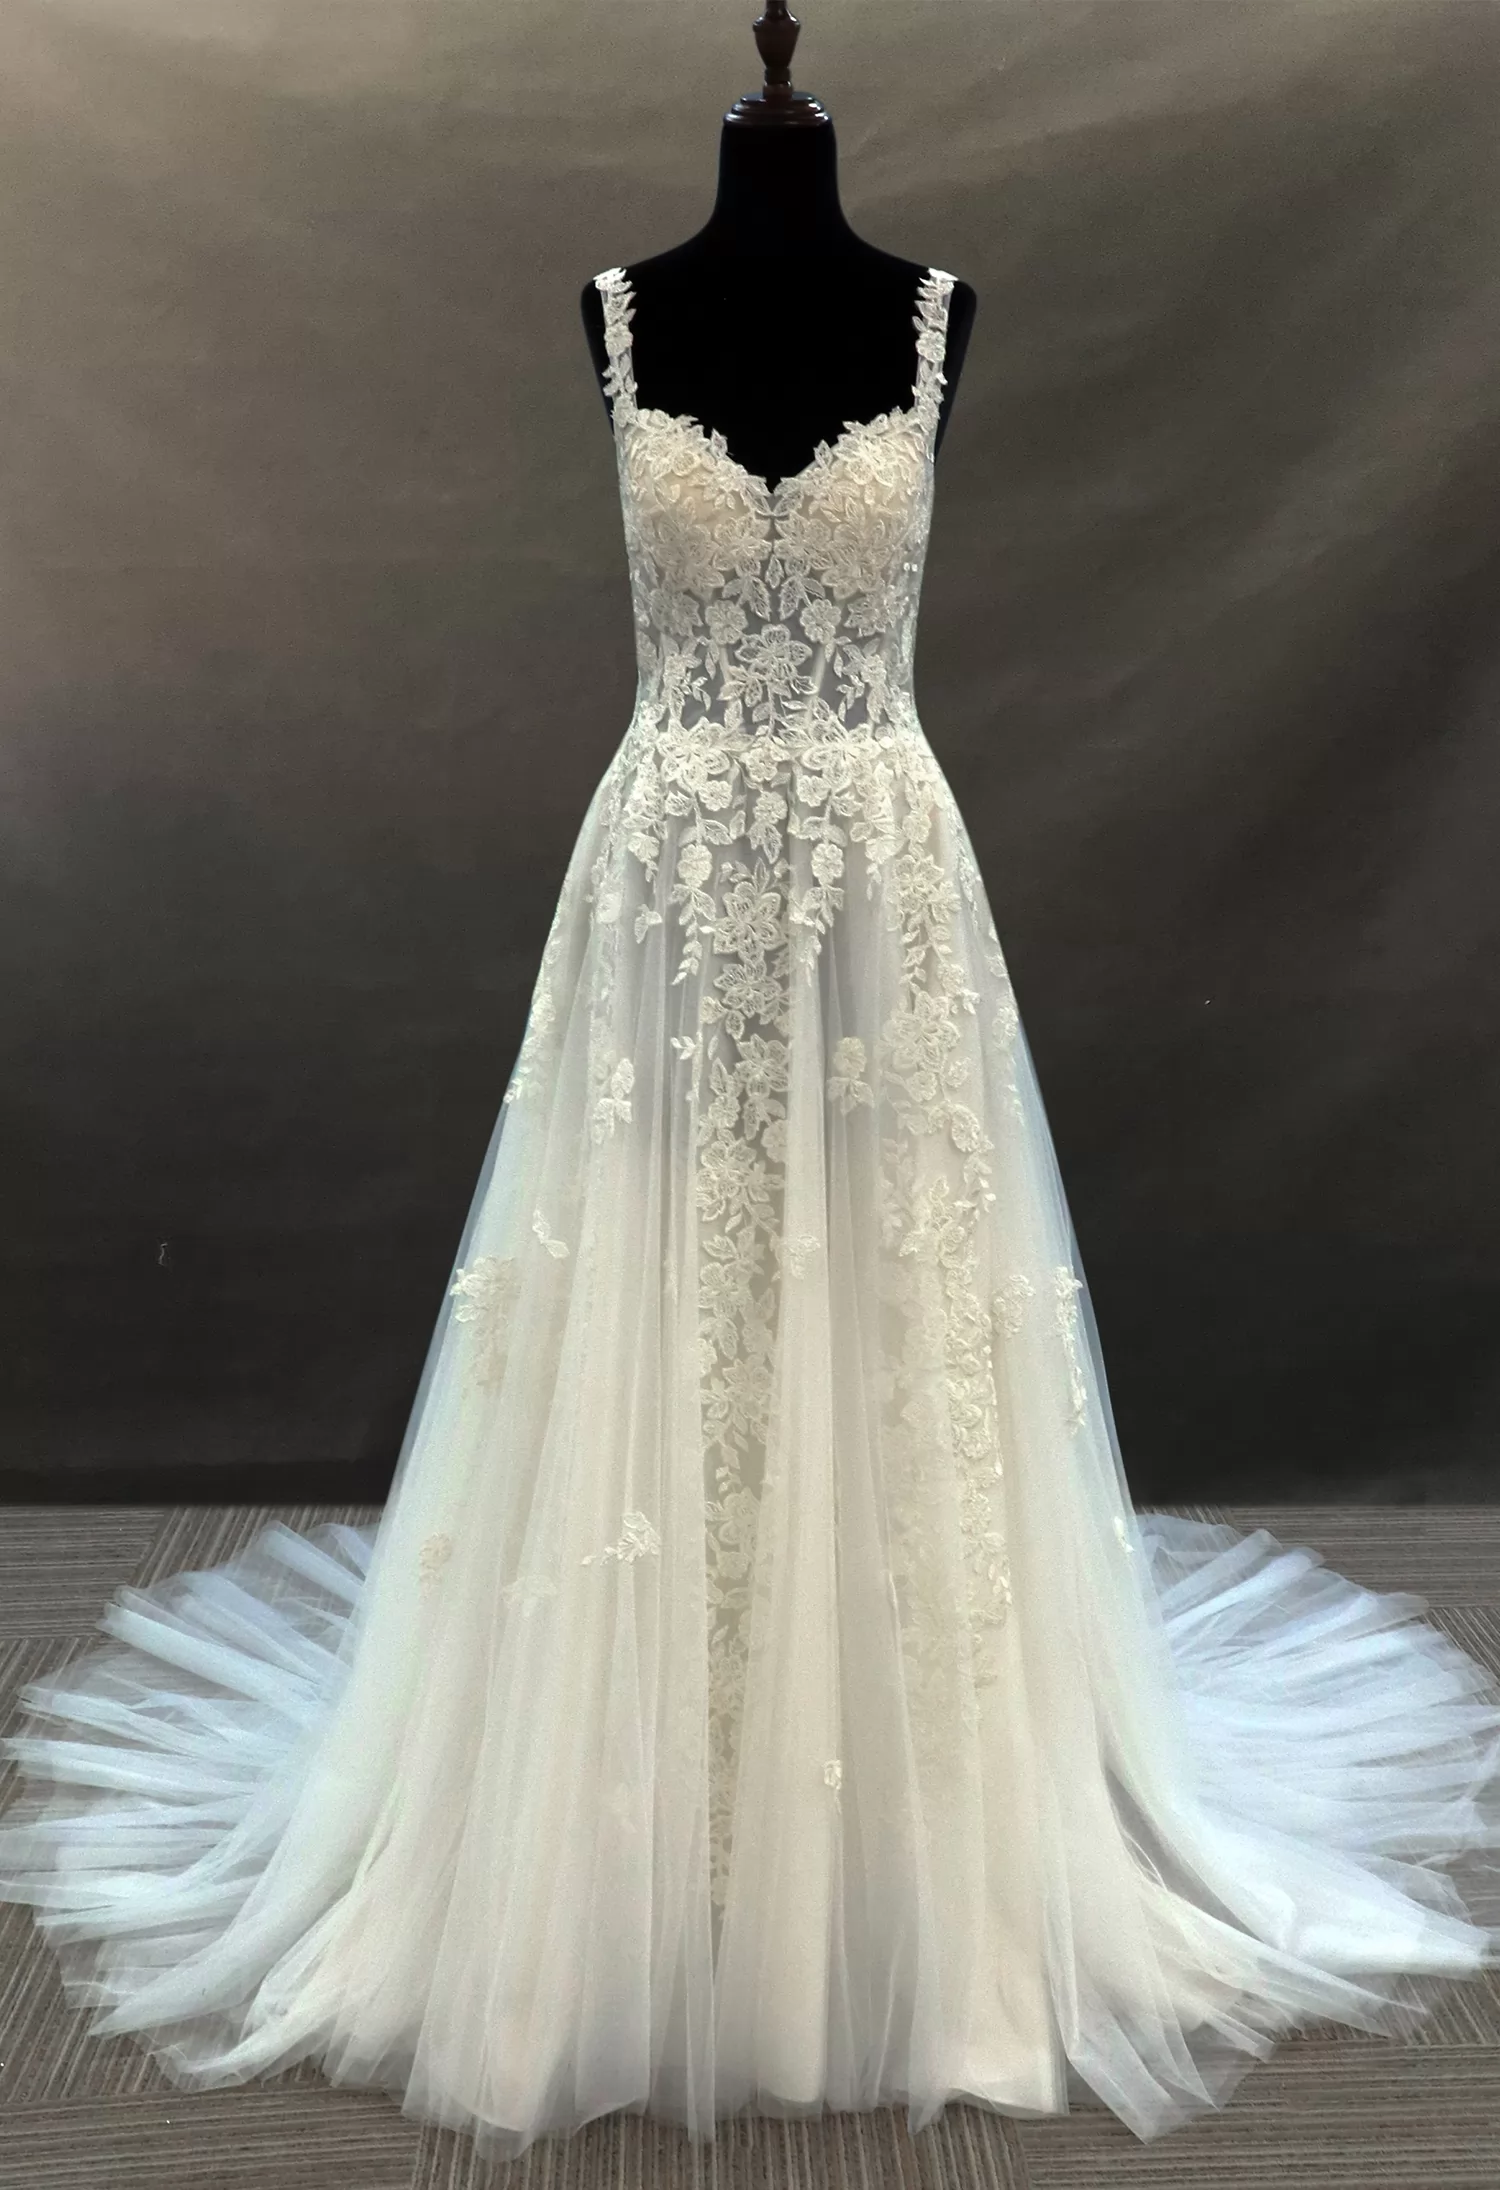 Illusion Beaded Tulle Bridal Gown With Floral Lace